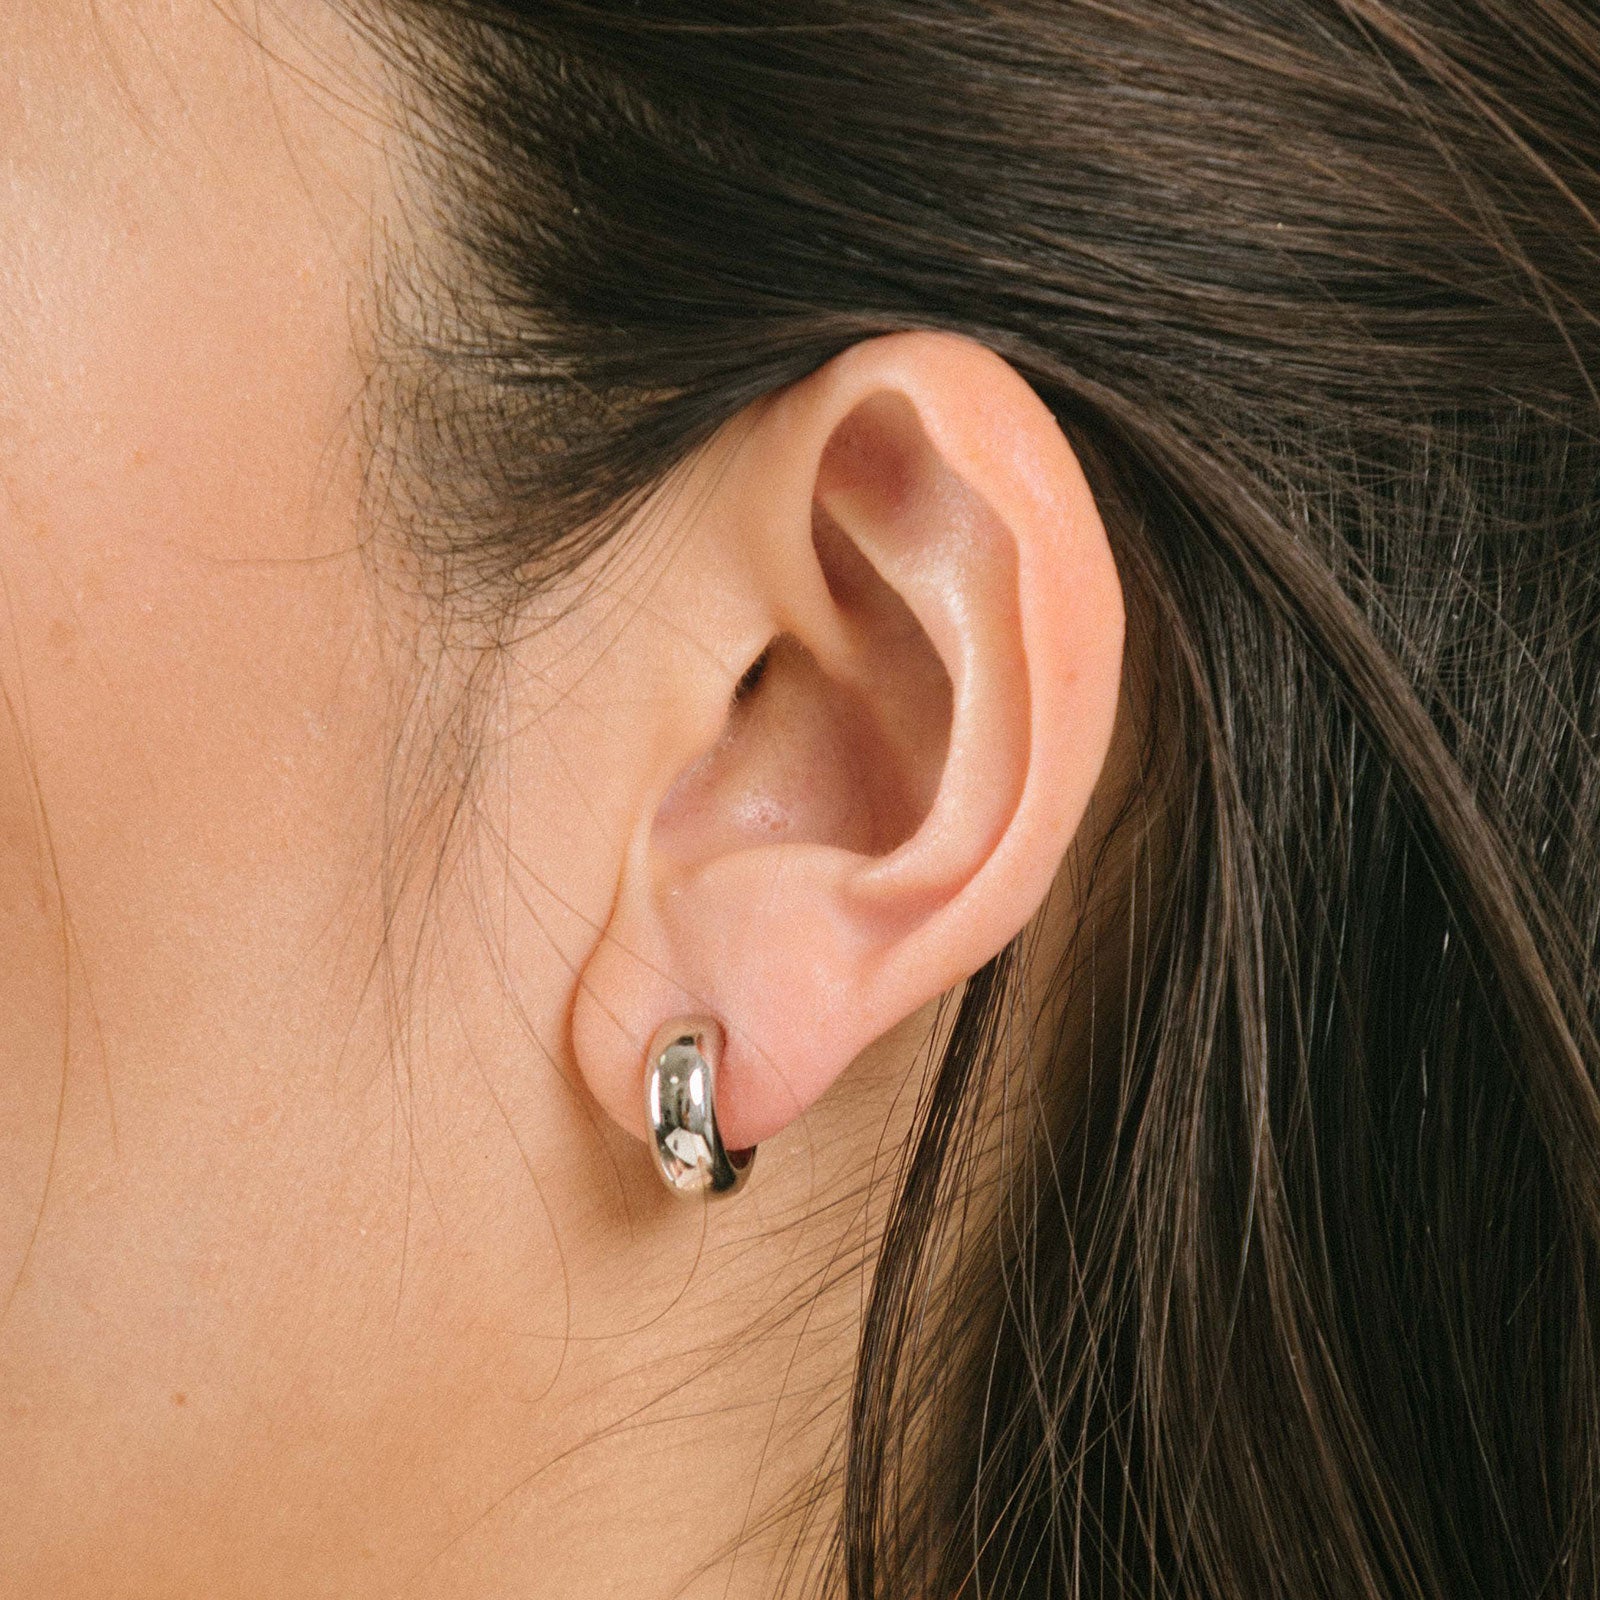 A model wearing the Everyday Essentials Set features three closure types: invisible resin, sliding spring and mosquito coil. It includes a Simple Silver Huggie Clip-On, Mini Hoop Earrings and Silver Cassie Hoop Earrings. Crafted from copper alloy, stainless steel and silver tone metal alloy, this item comes with three pairs and is also available in Gold.